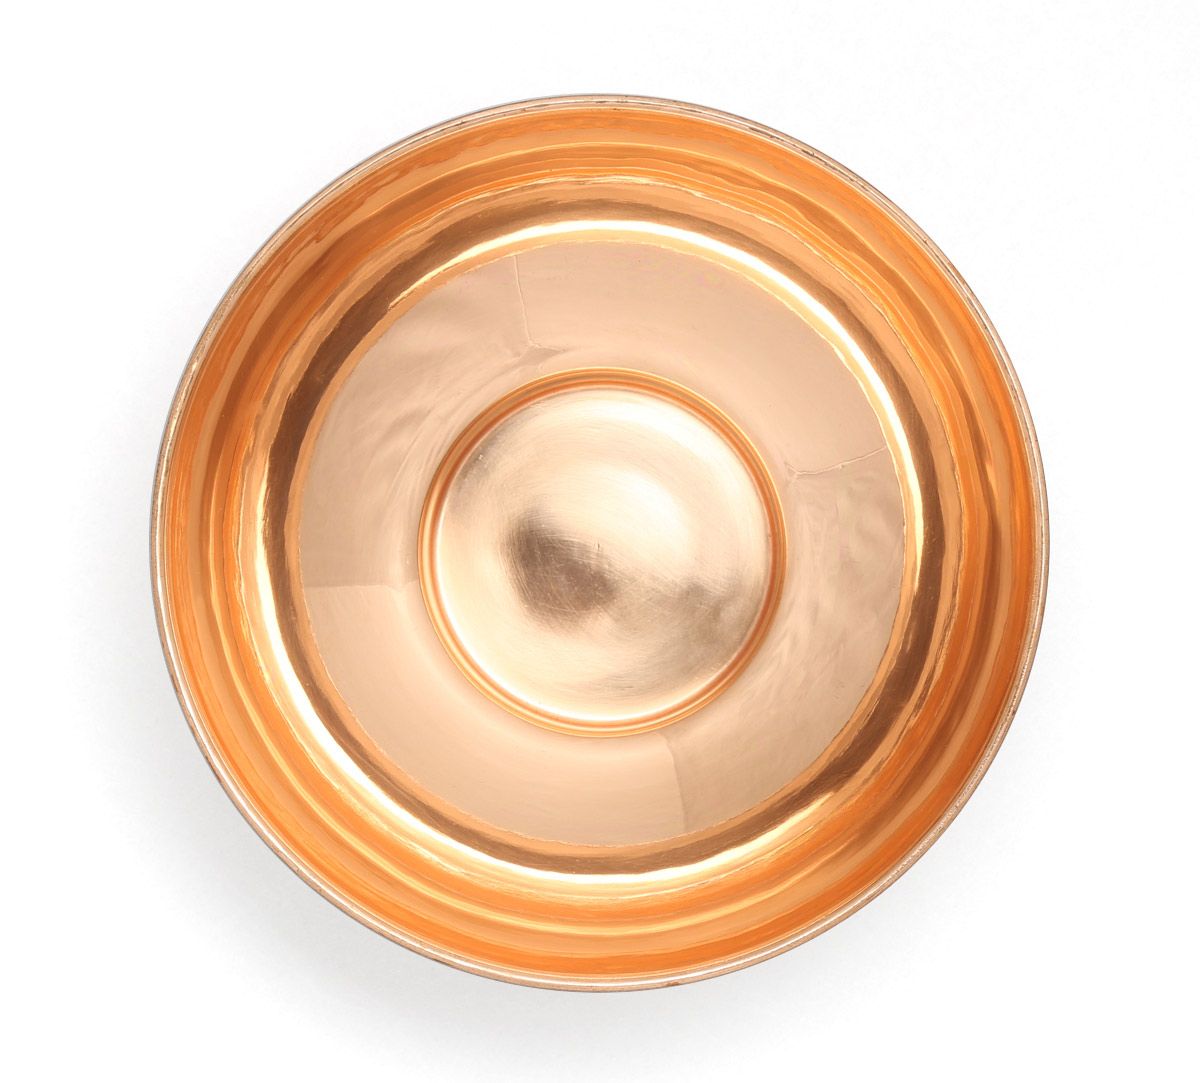 India Circus Tropical View Copper Bowl